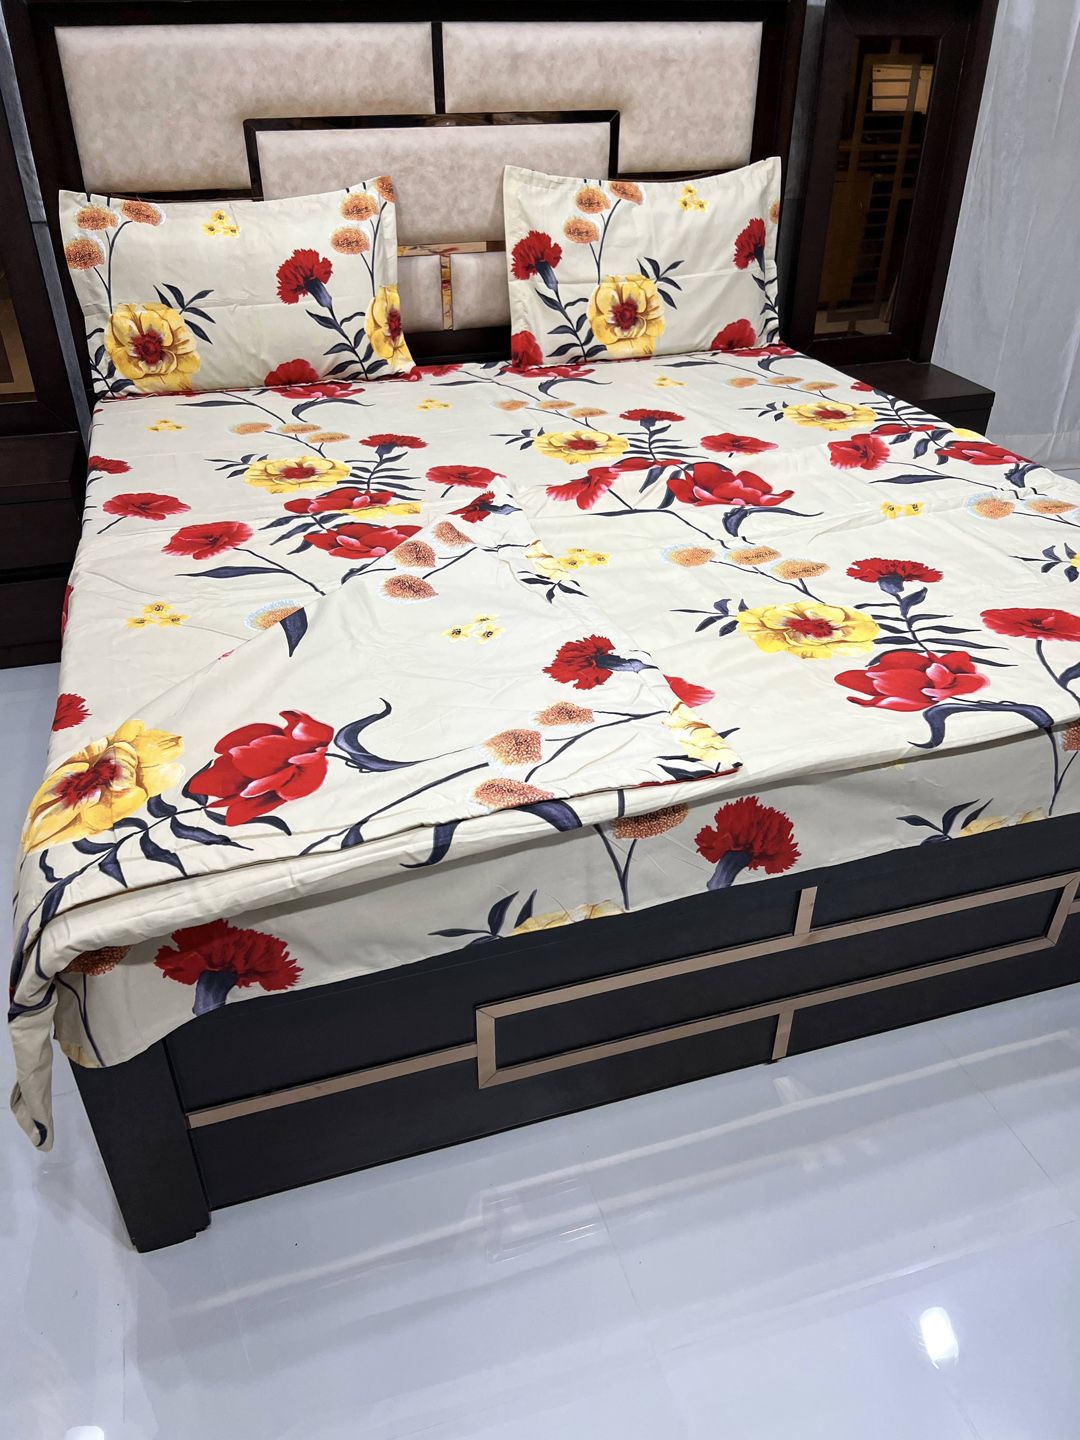 Pure Decor Beige Colored & Red Floral Printed Cotton Double King 250 TC Bedding Set With Comforter Price in India